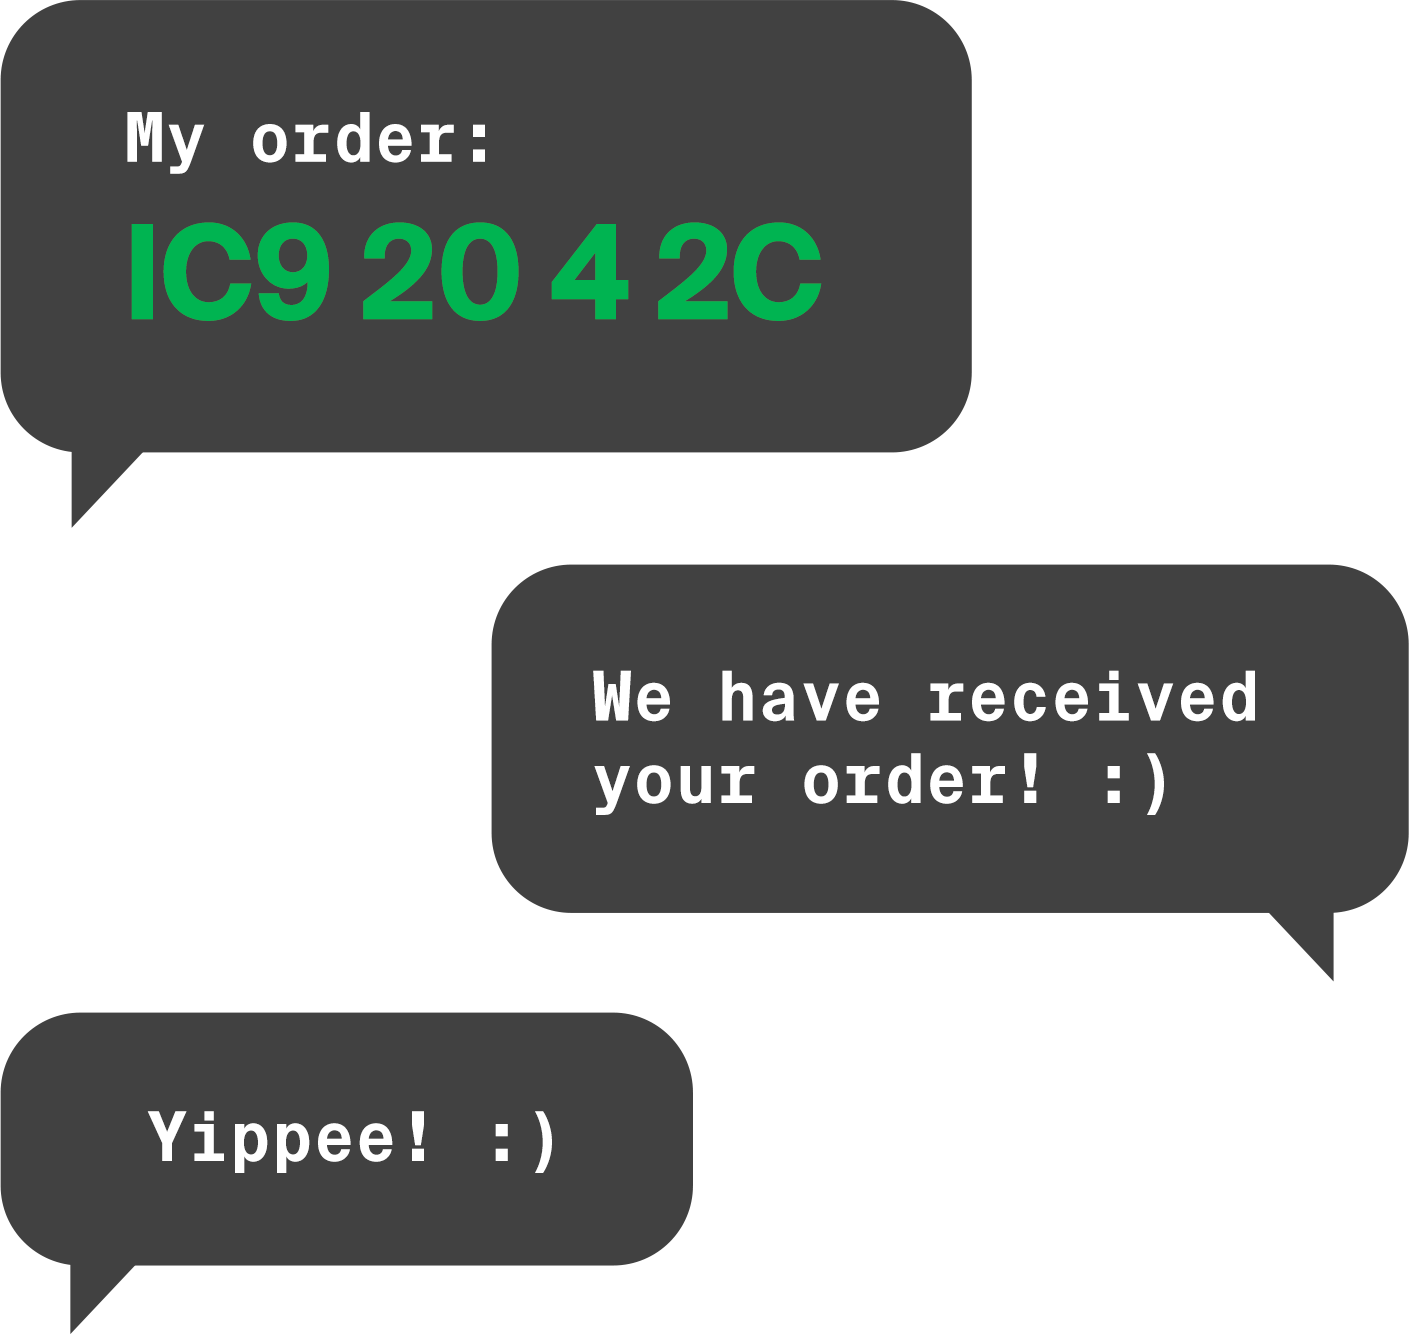 The message should be like the following example: "IC9 20 4 2B". You will get a confirmation message once we have received your order.